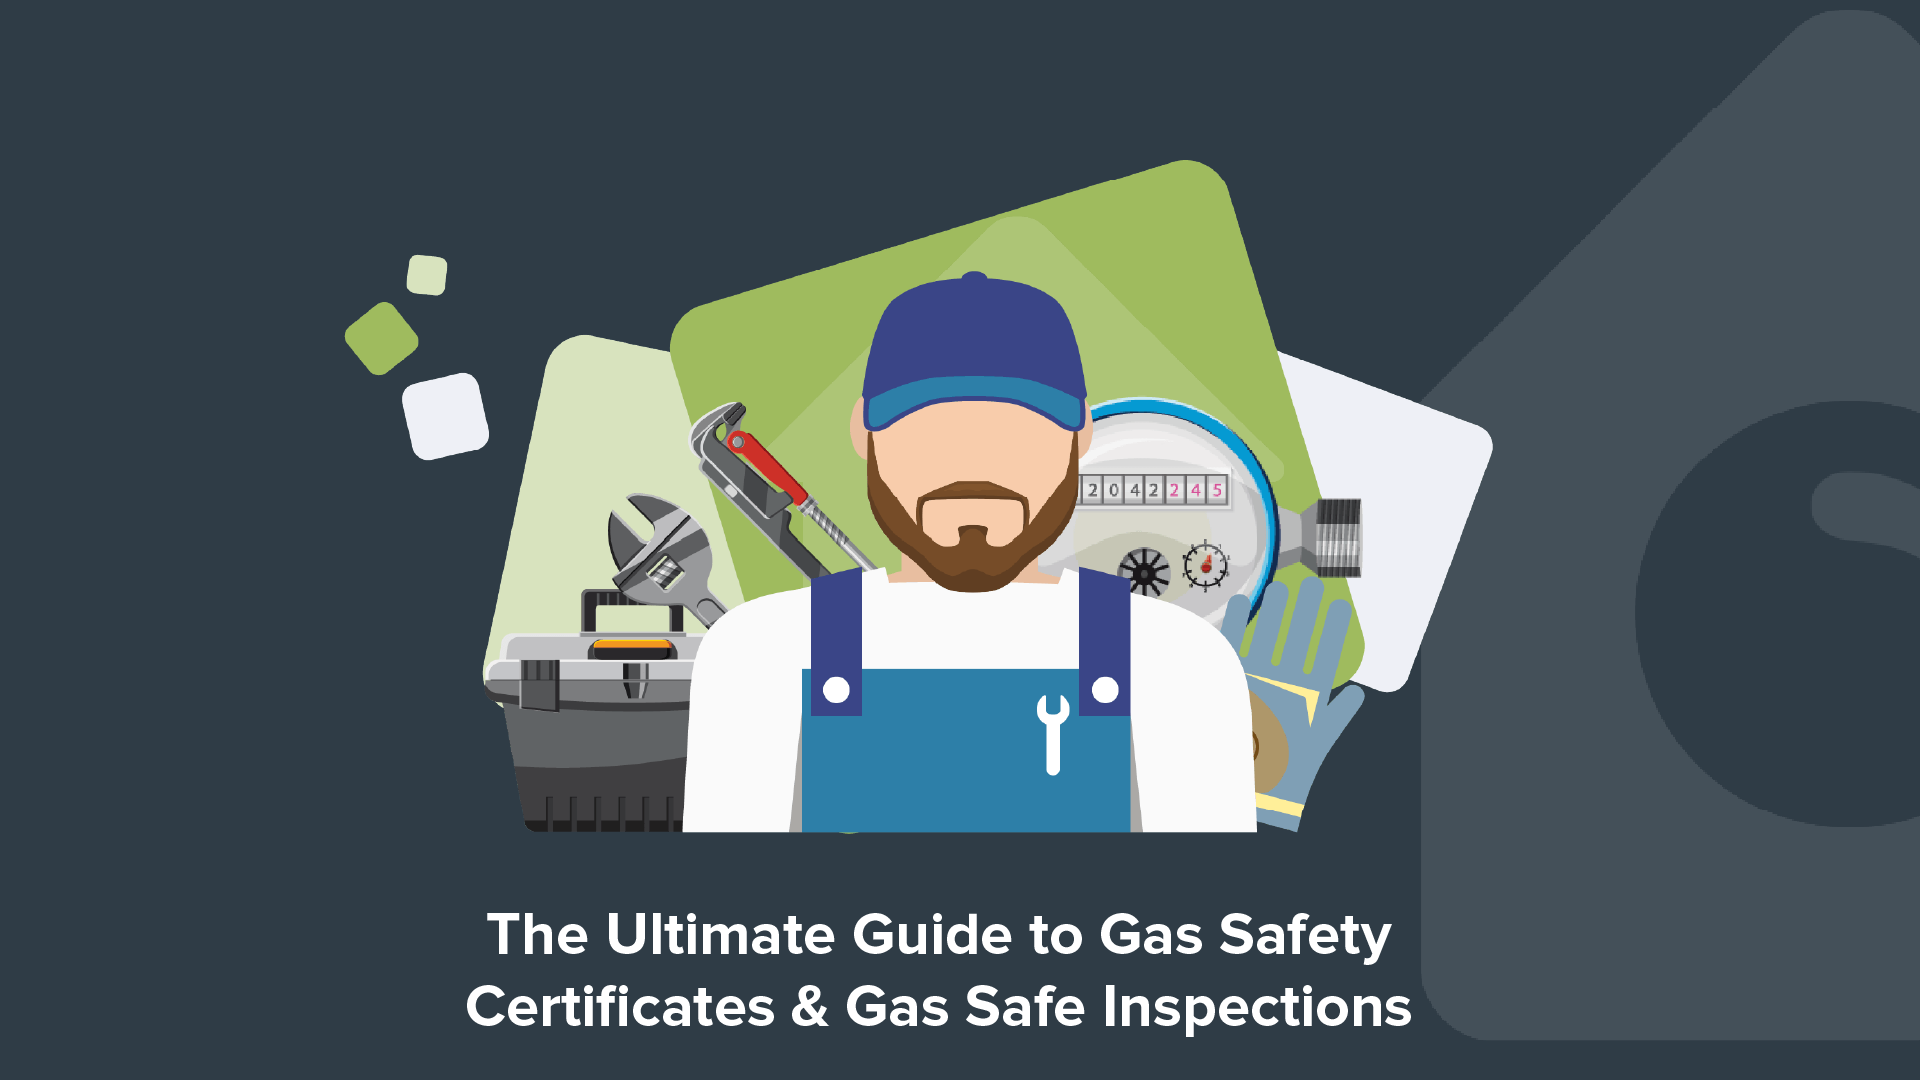 The Ultimate Guide to Gas Safety Certificates & Gas Safe Inspections